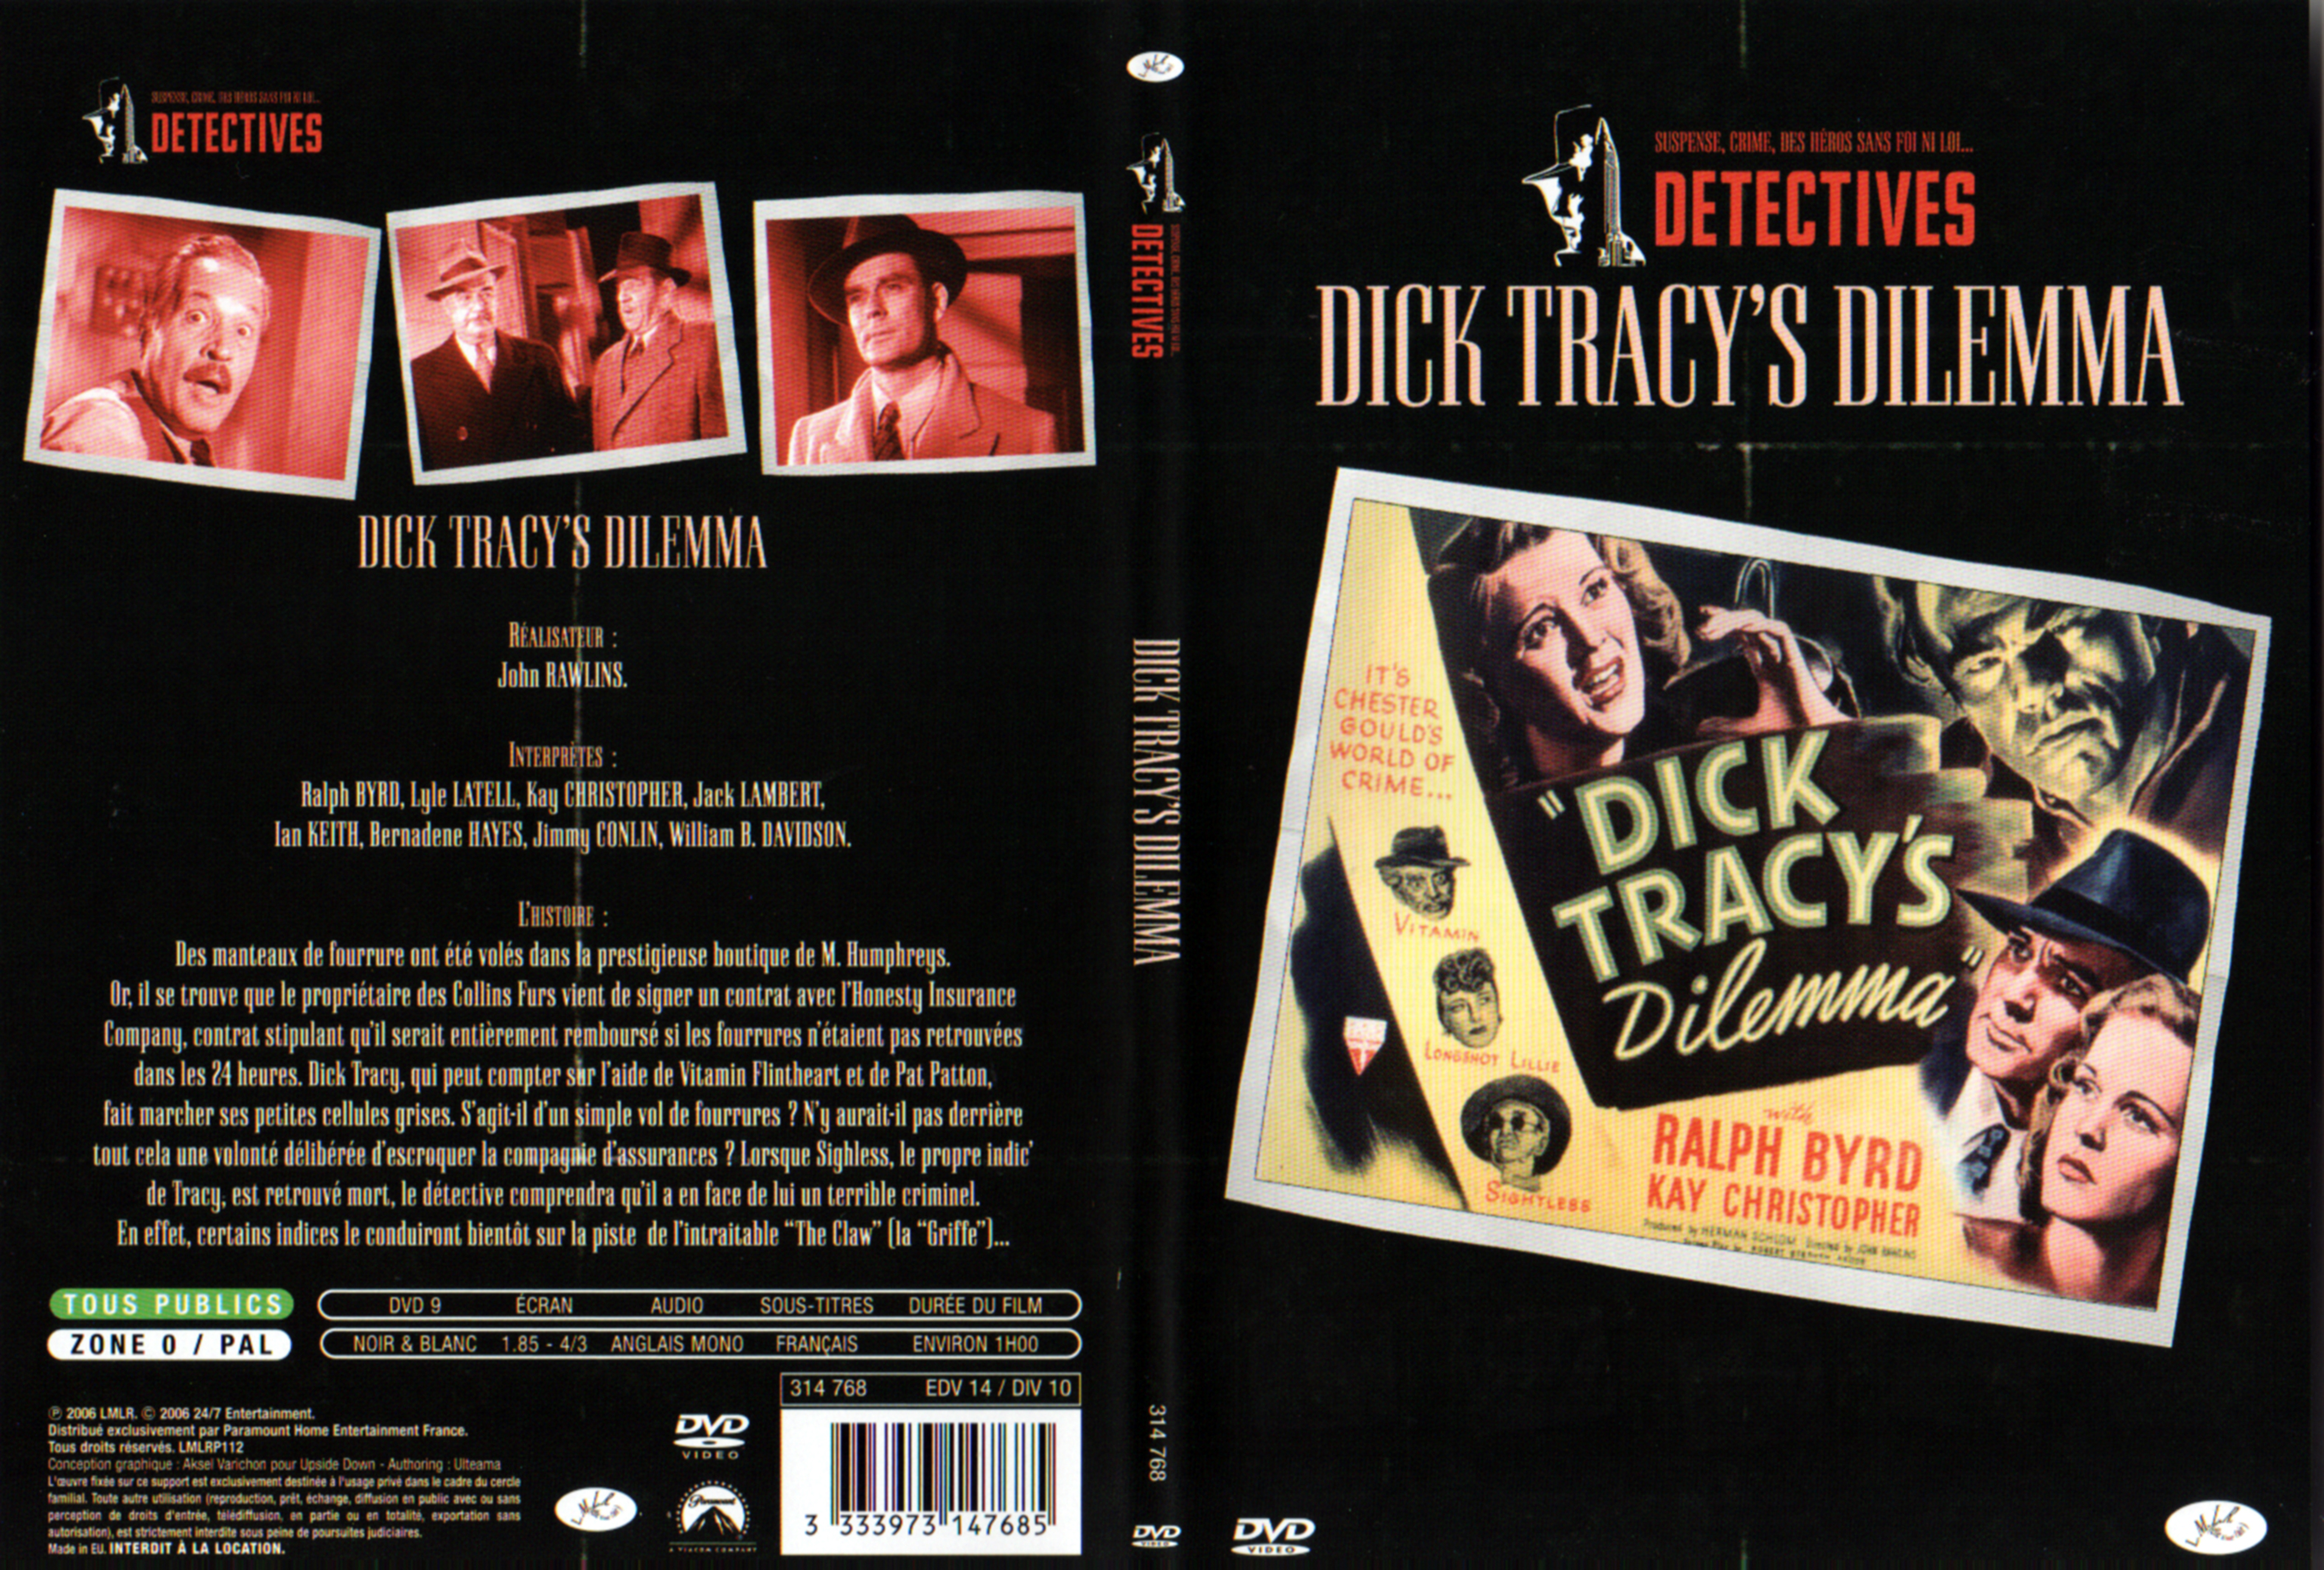 Jaquette DVD Dick Tracy